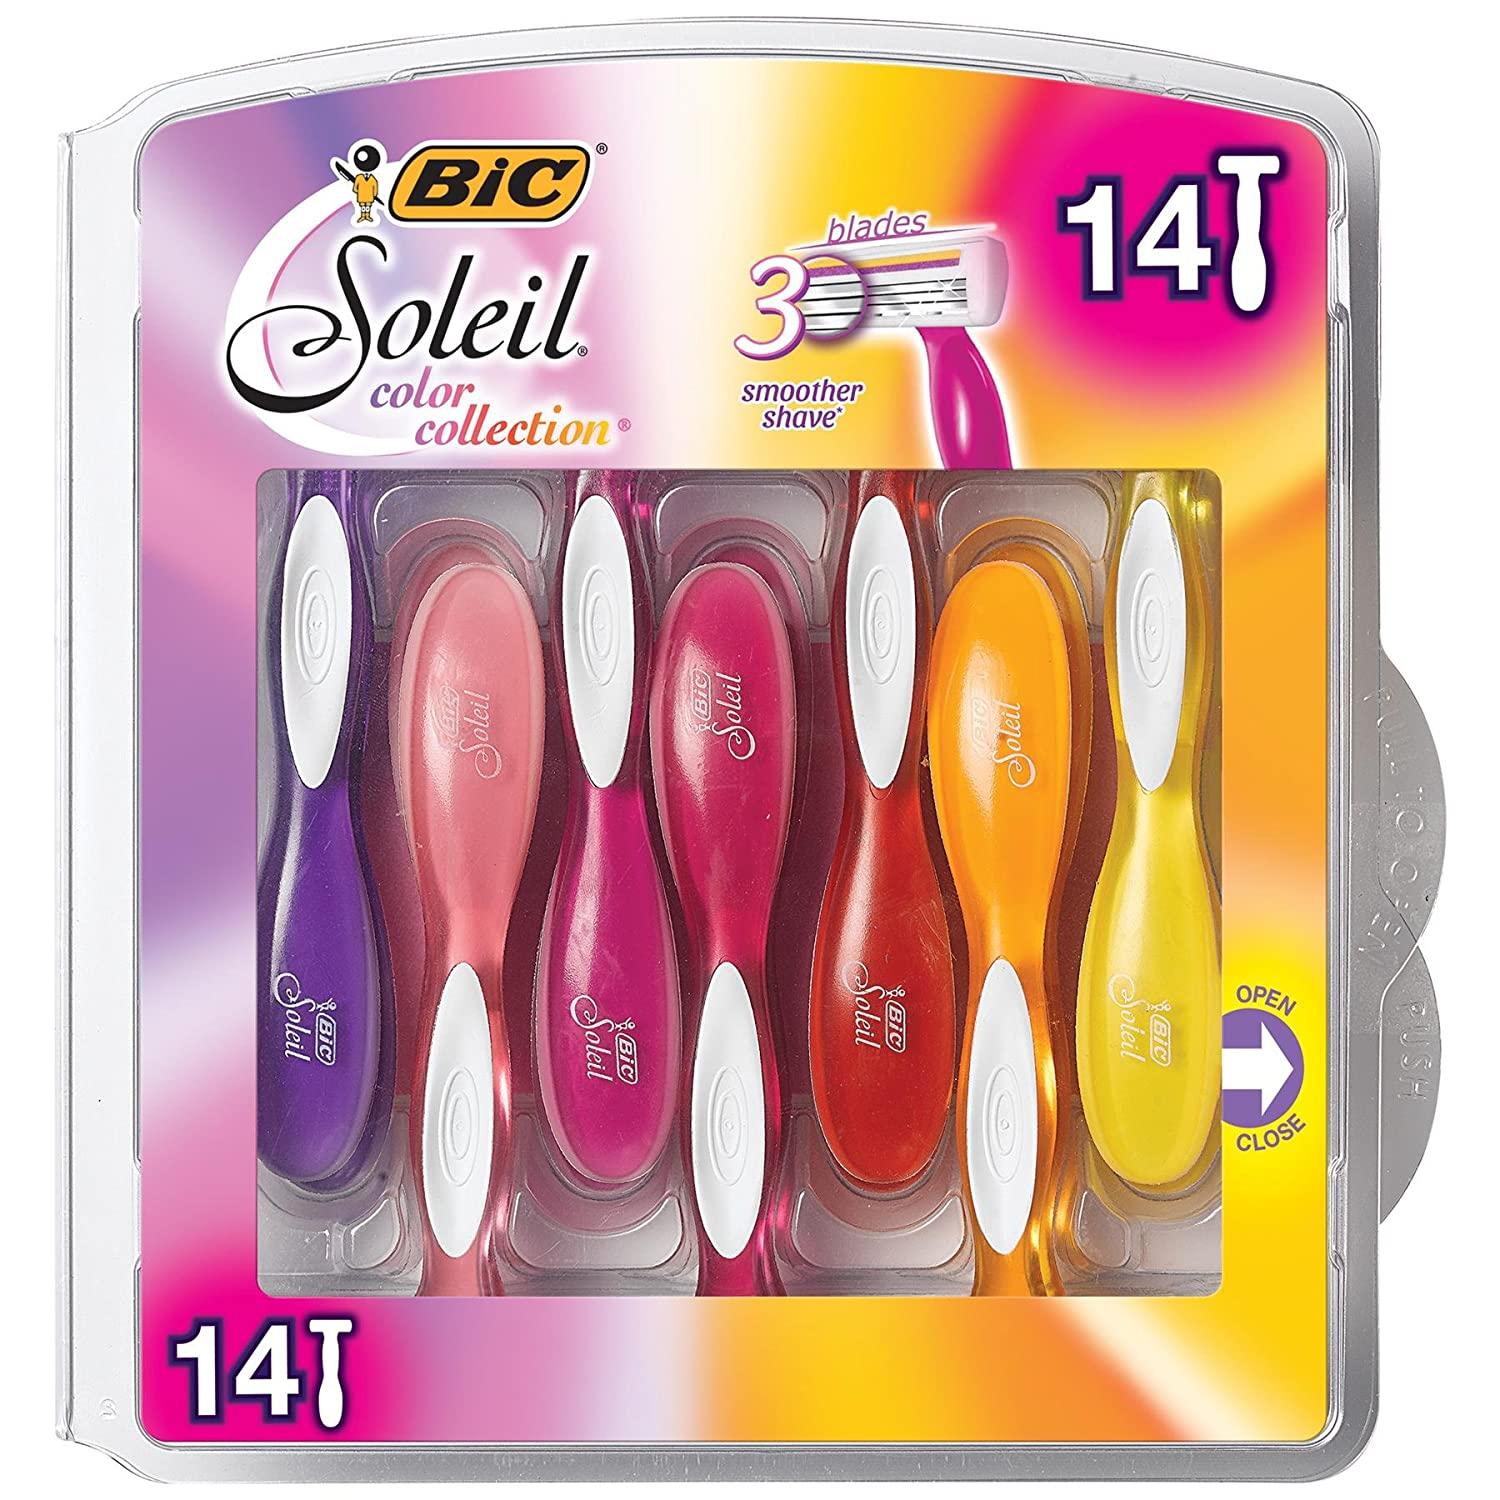 14 BIC Soleil Color Collection Womens Premium Shaving Razor Set for $6.96 Shipped